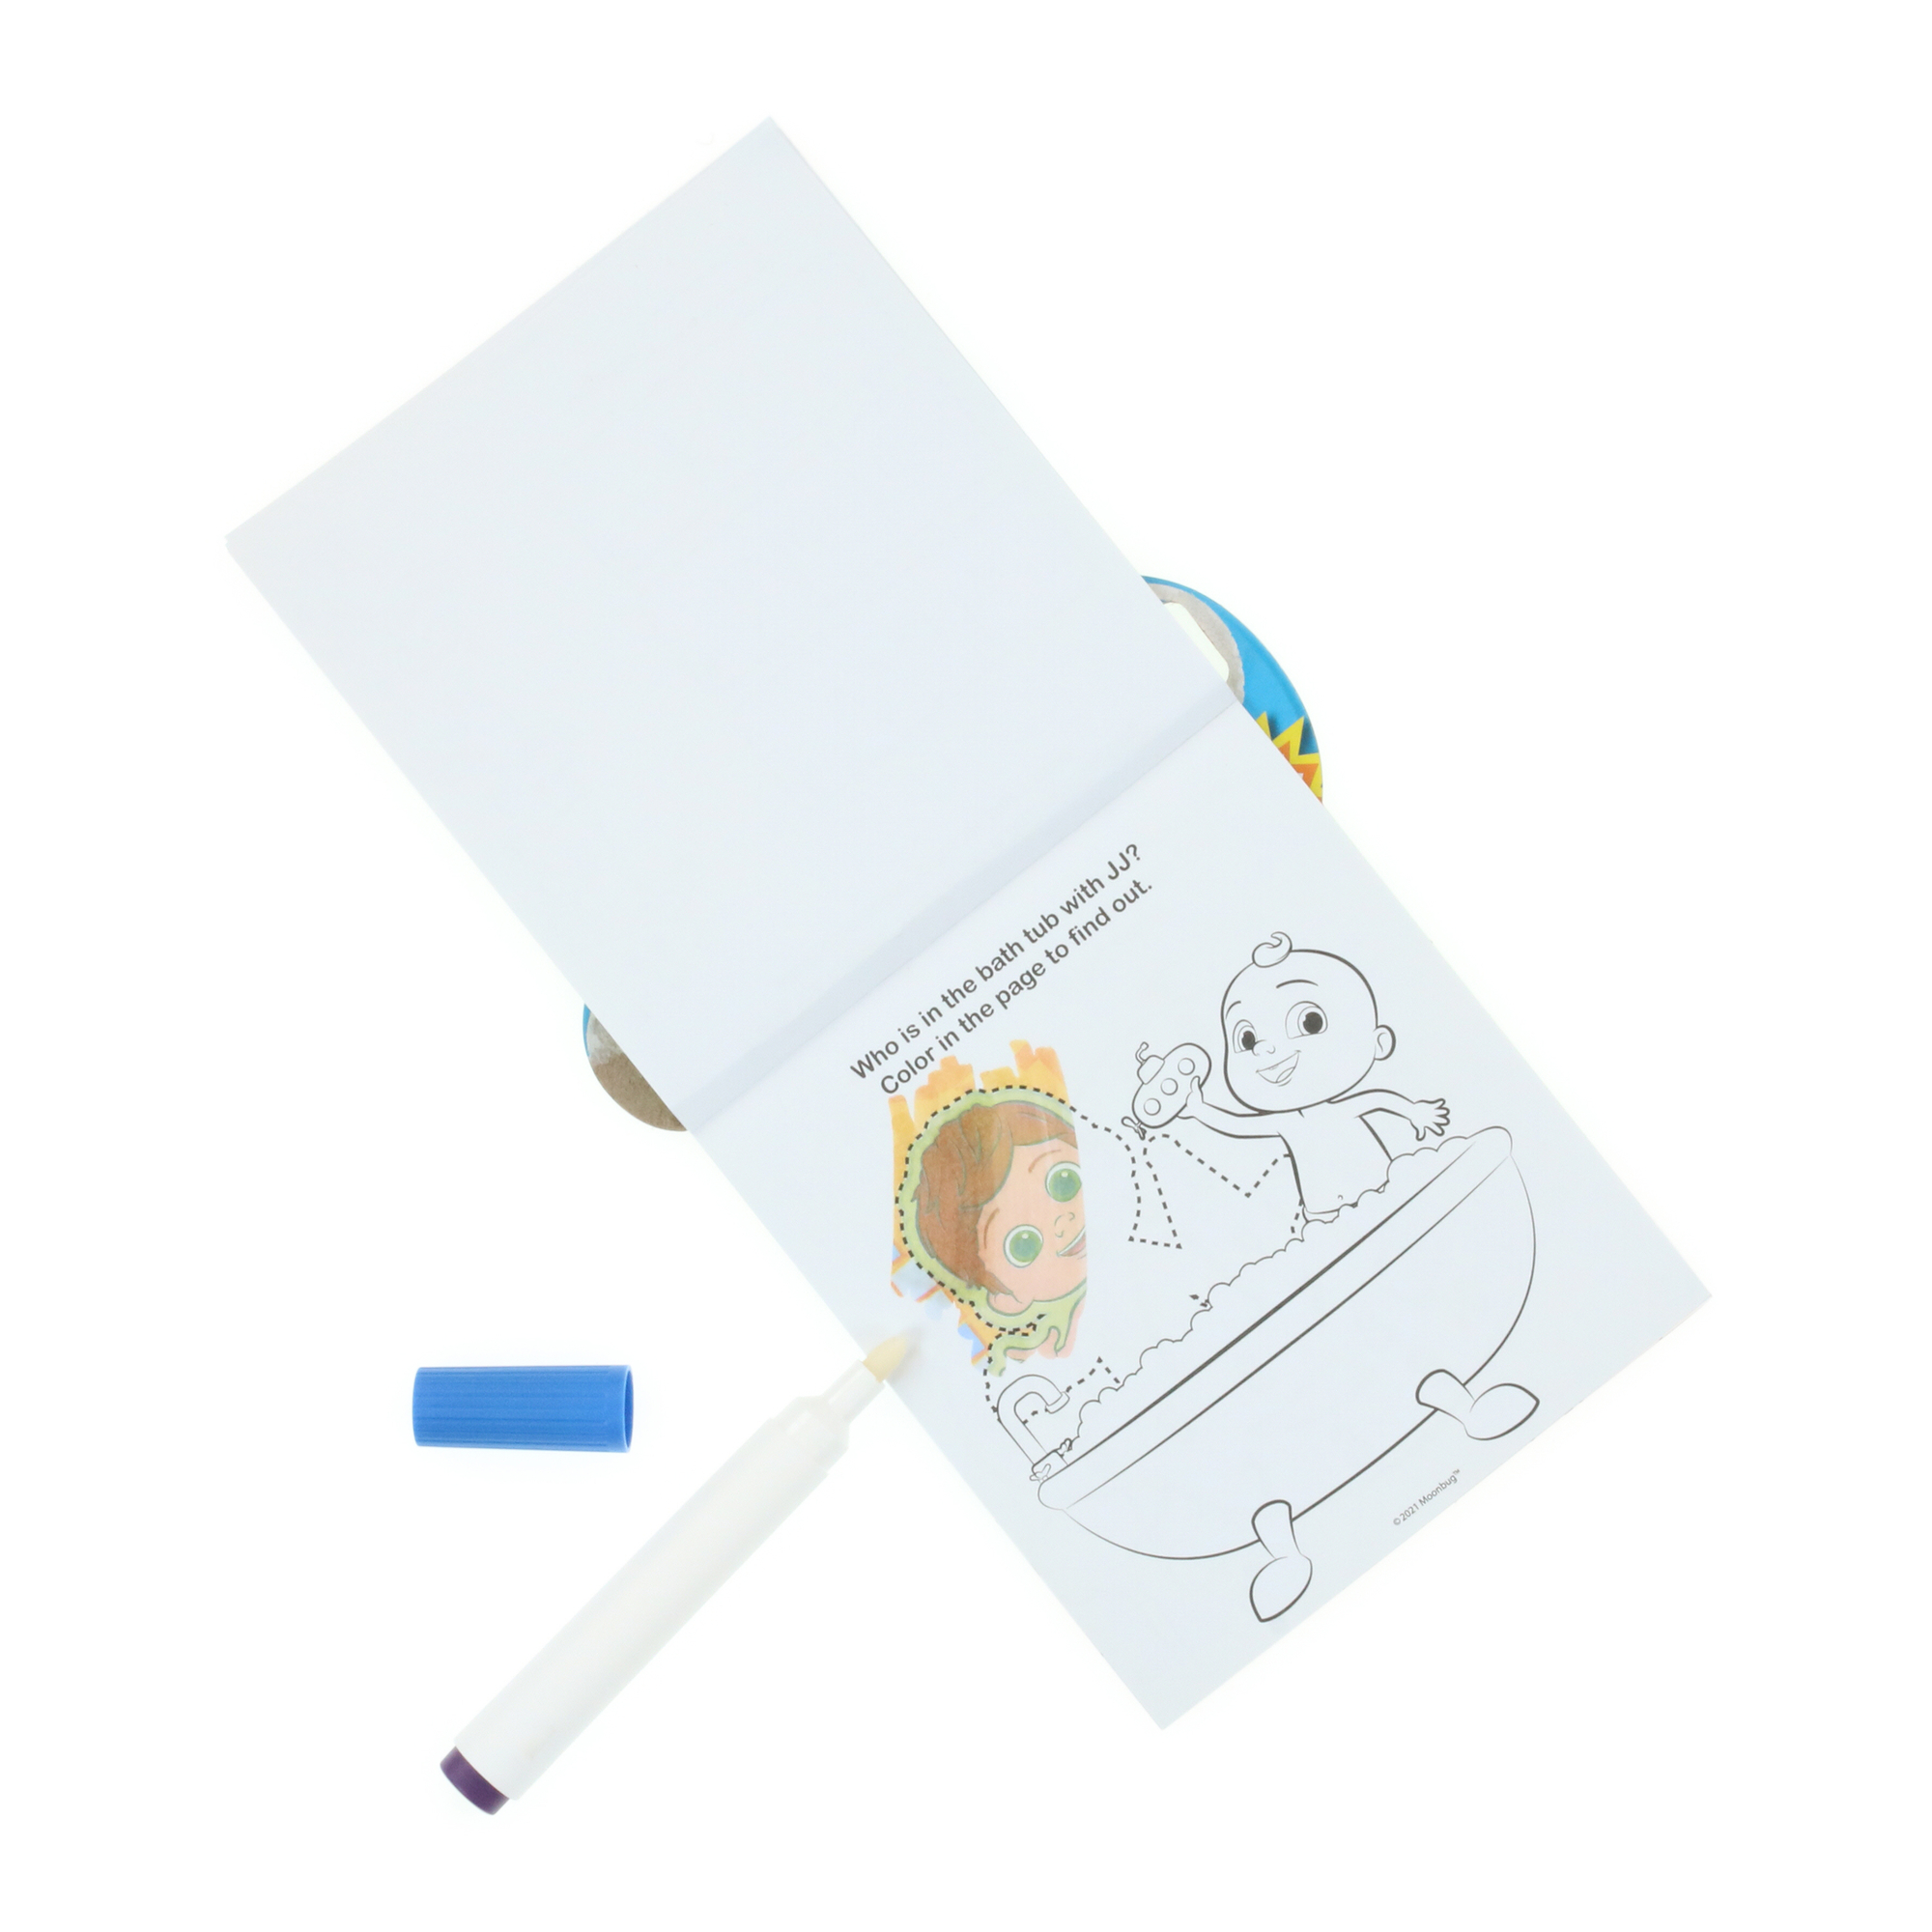 cocomelon™ imagine ink® magic ink pictures mess-free coloring book